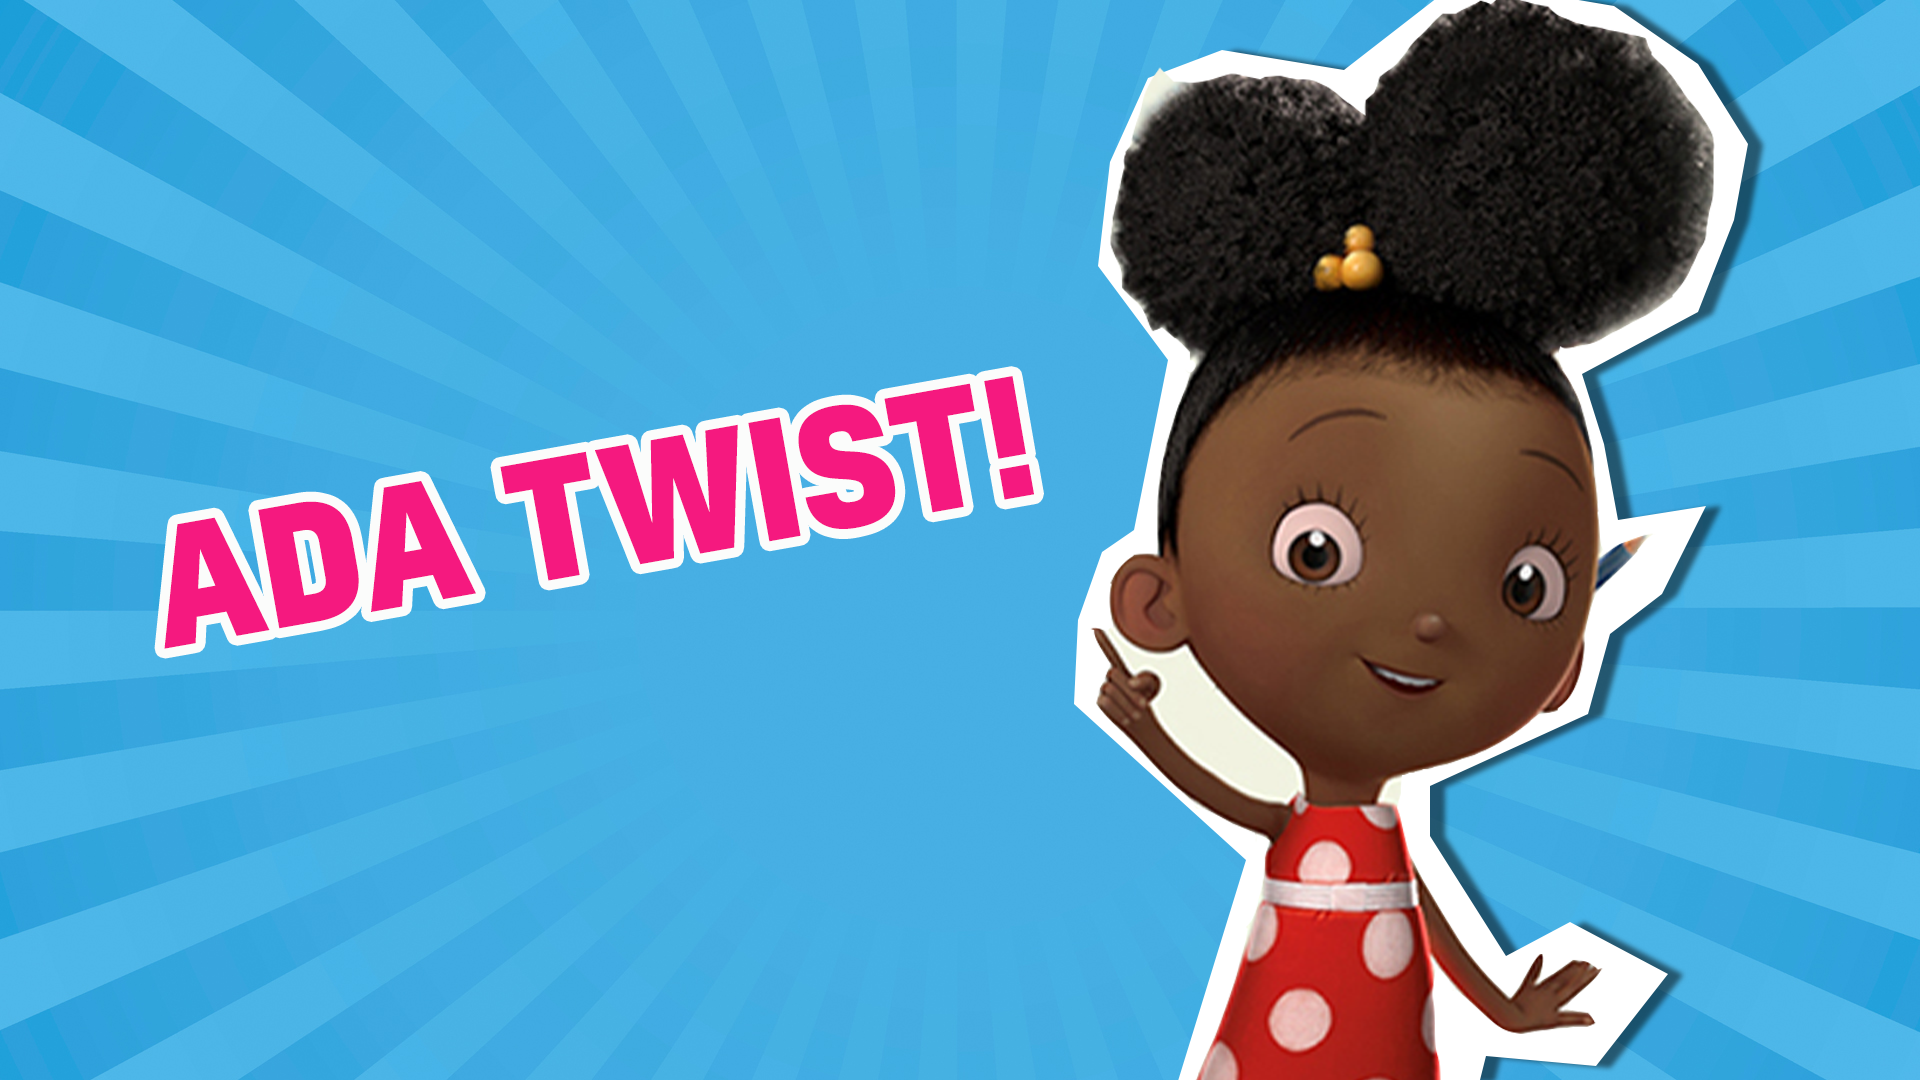 You should watch Ada Twist! You love finding out new stuff and Ada Twist is the perfect show to help you discover more about science!